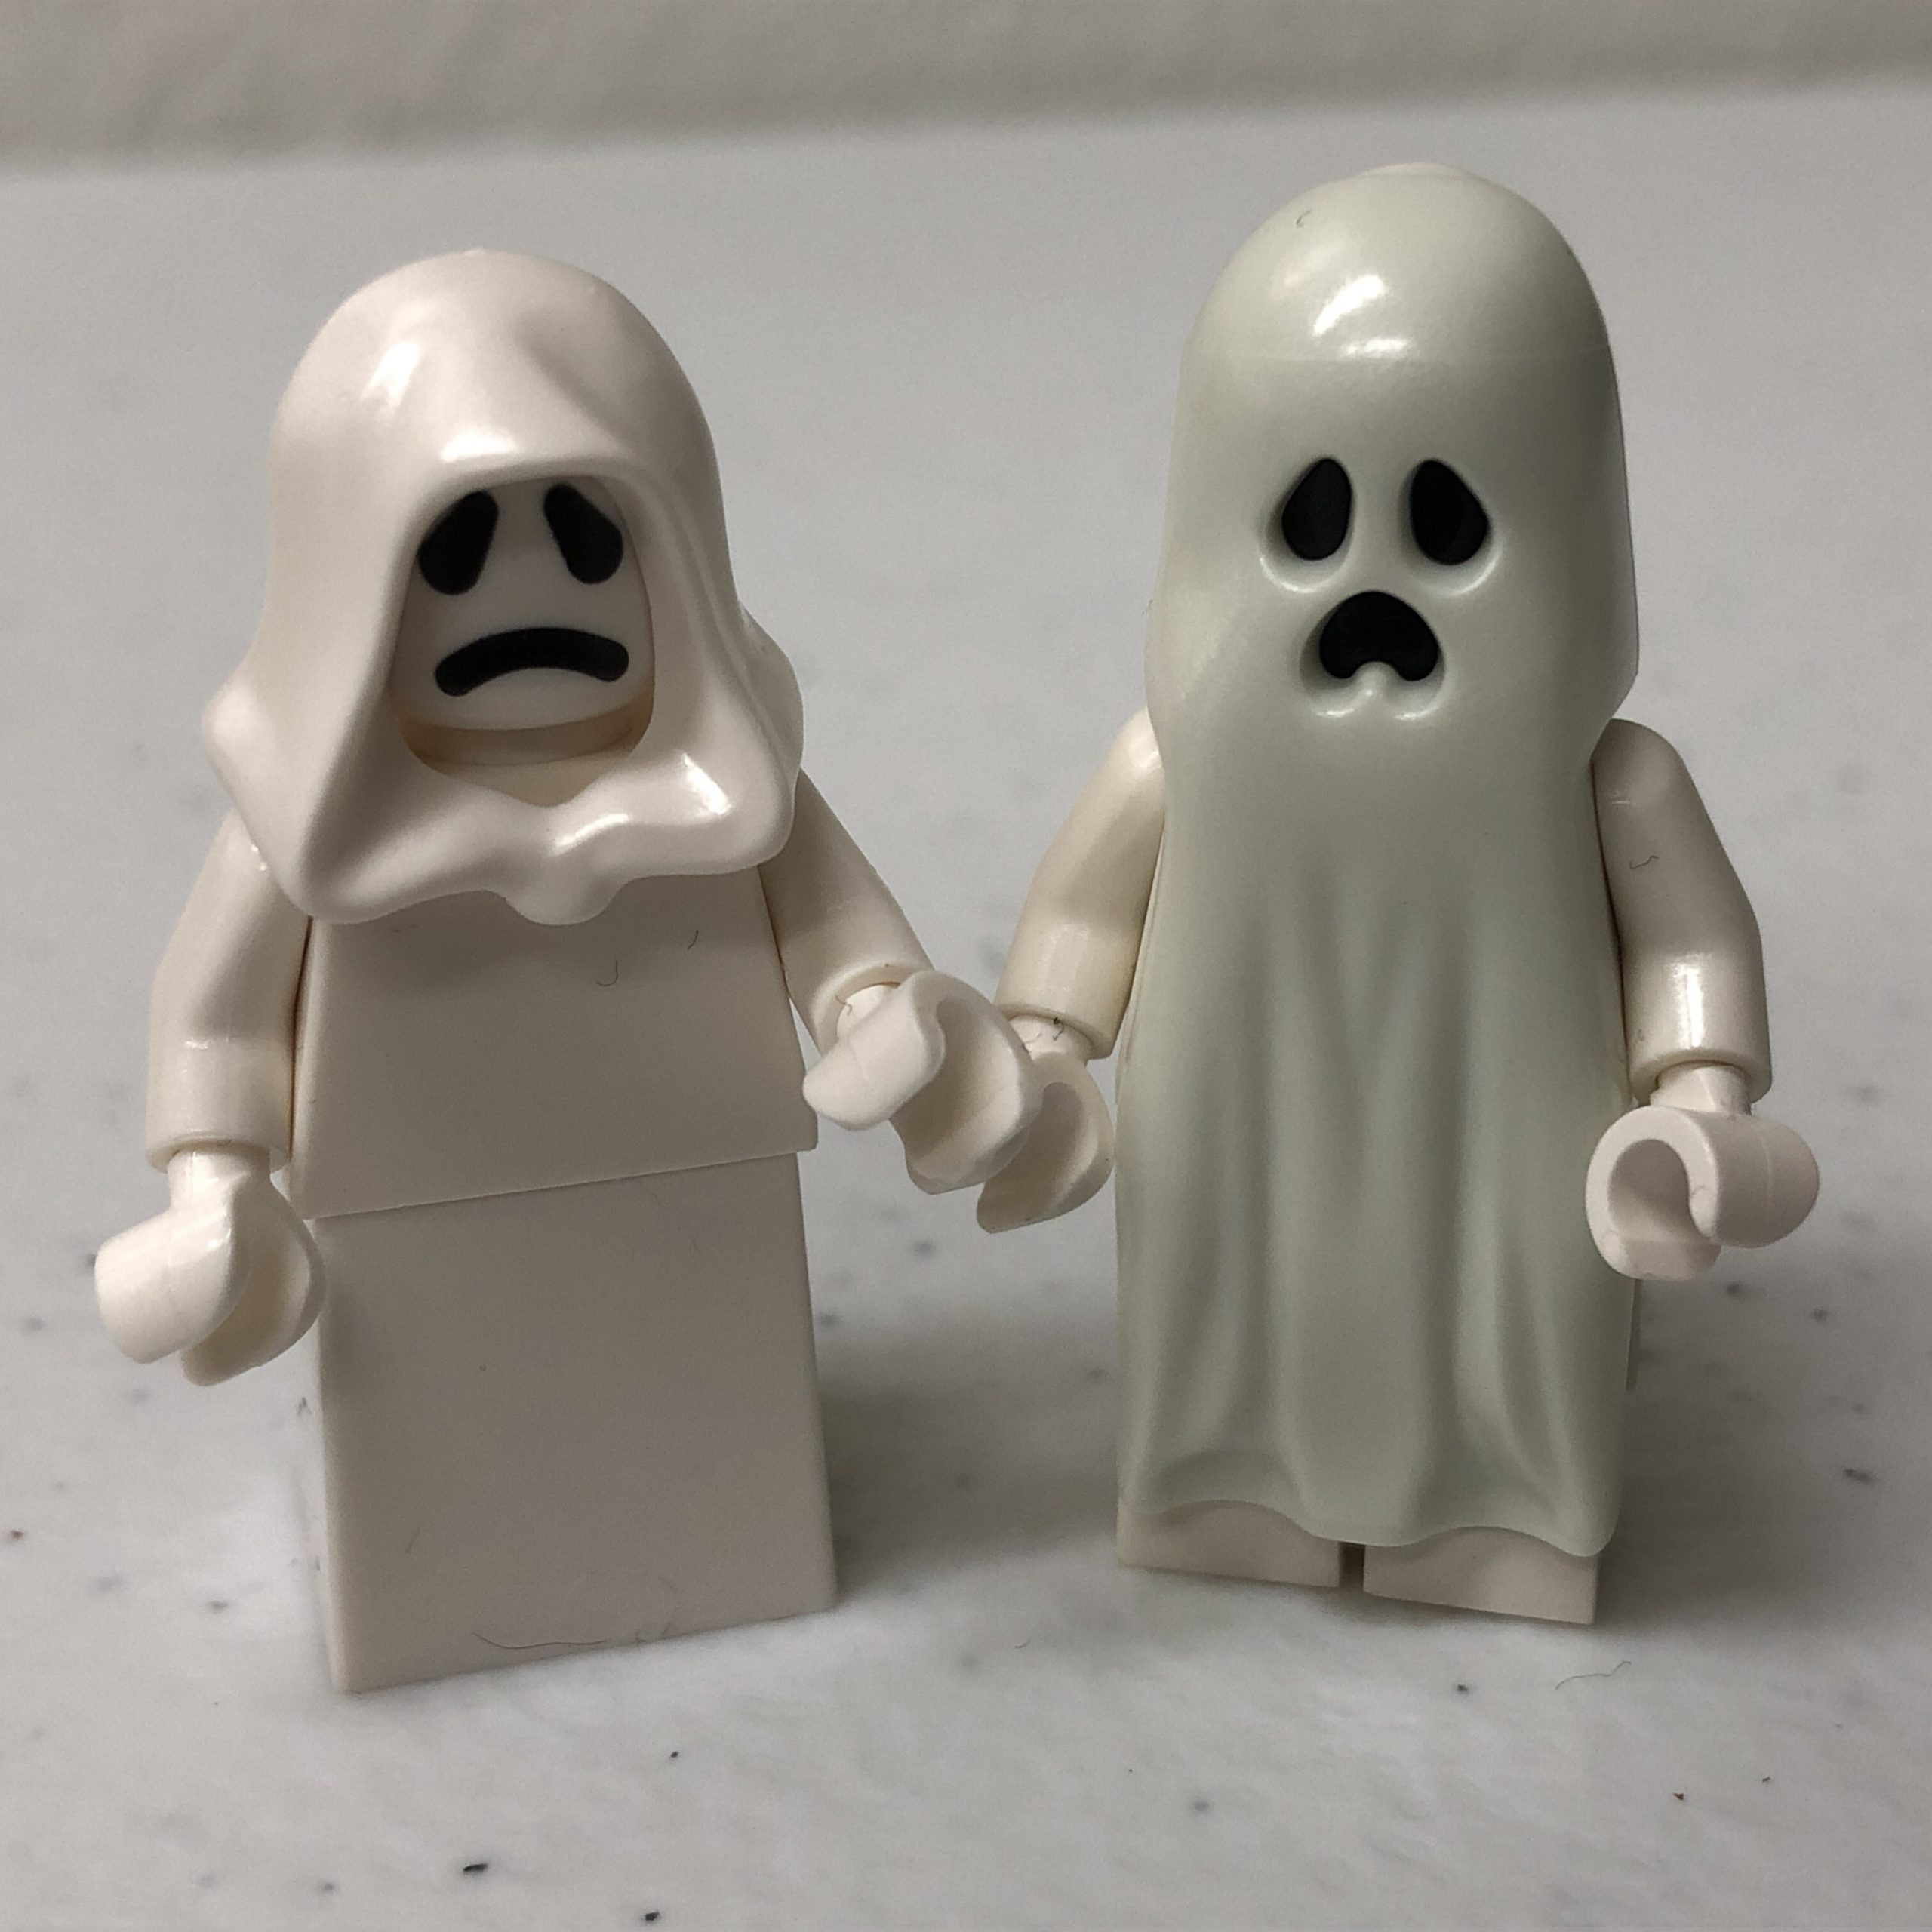 Comparison of Old LEGO Ghost with New whataslacker about bricks